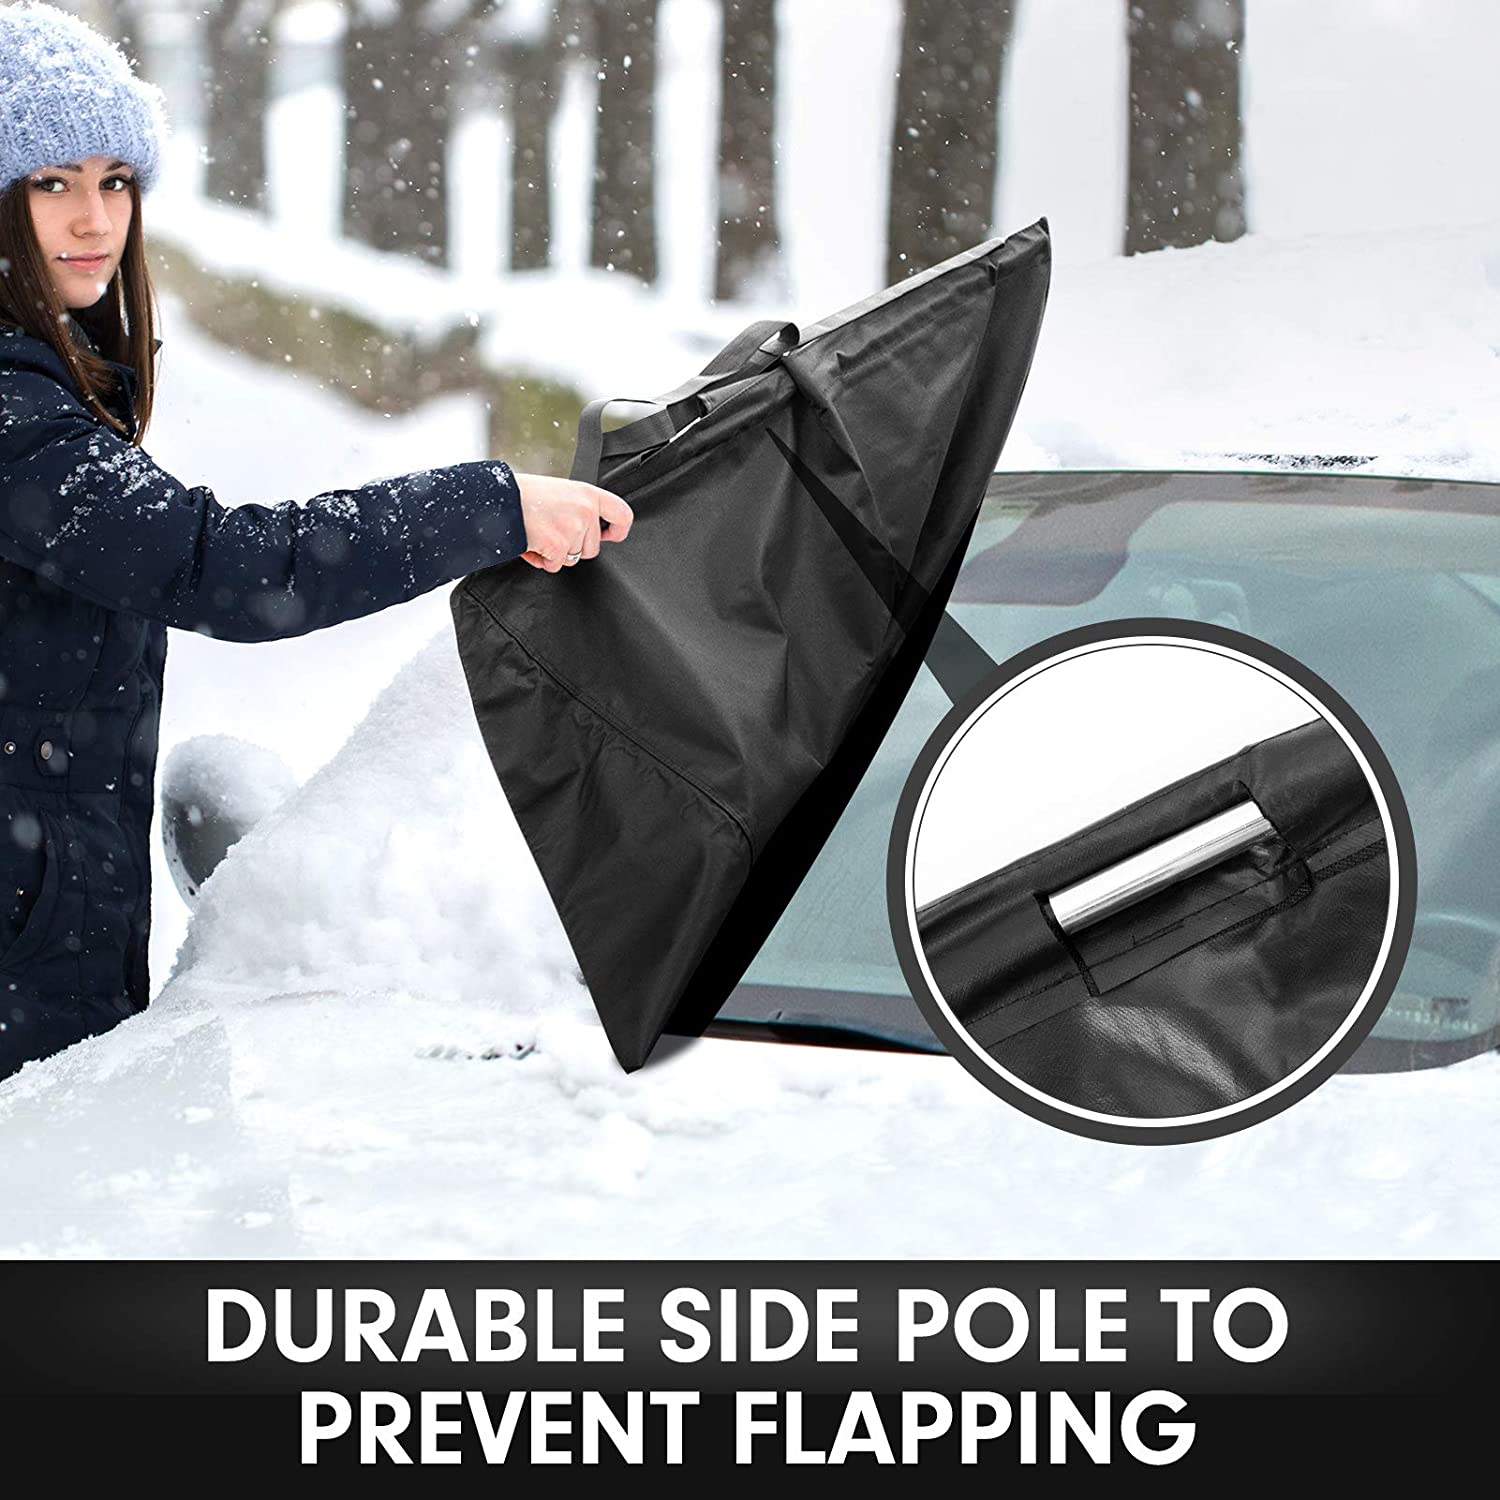 Protector Parabrisas Universal, 183 x 116 cm Windshield Cover Protector KOROSTRO Windshield Snow Cover for Winter Snow Removal Magnetic Anti Ice Frost Dust and Windproof Protection Folie for Most Vehicle